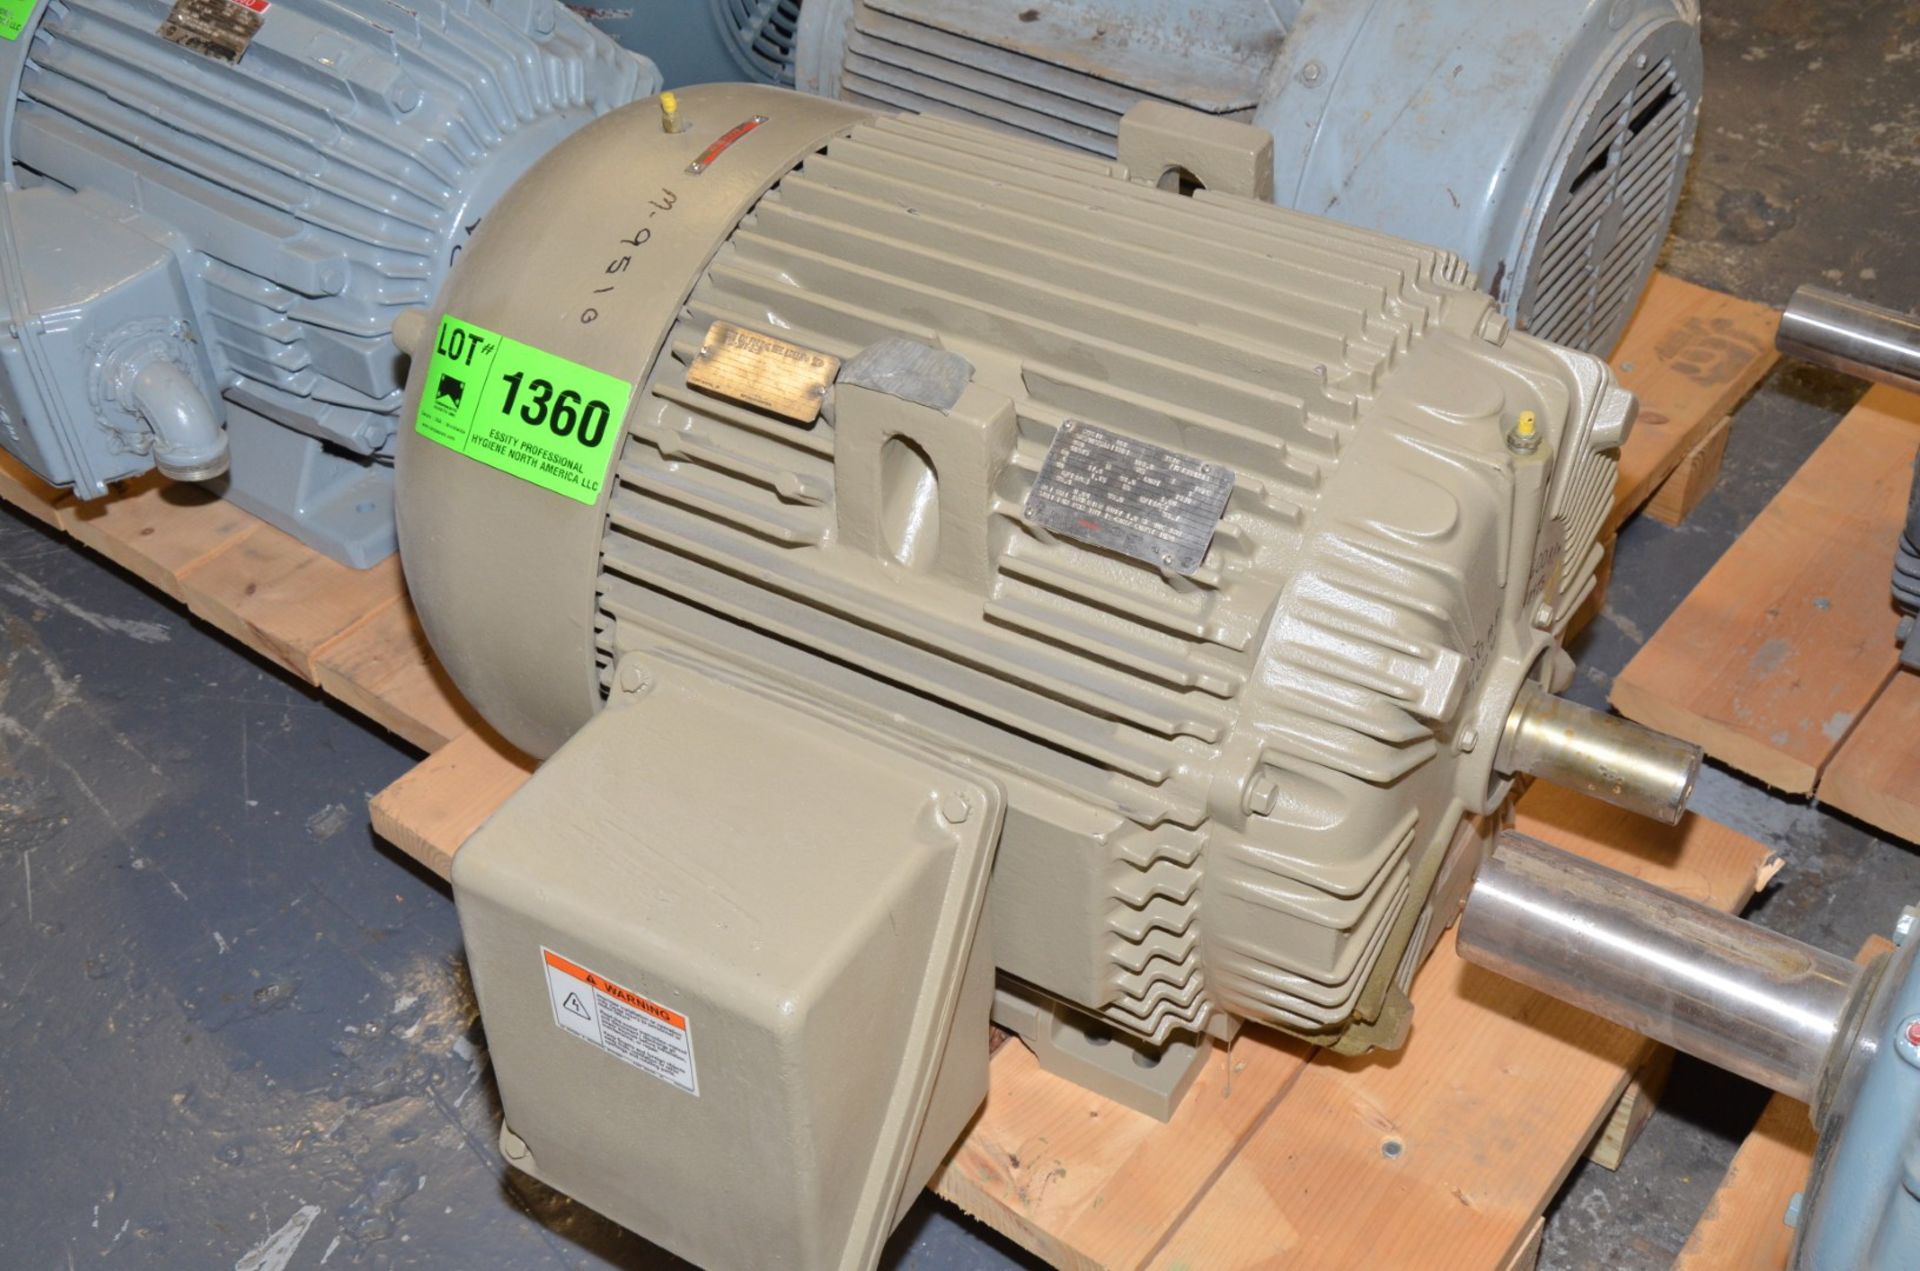 GE 100 HP 3570 RPM 460V ELECTRIC MOTOR [RIGGING FEE FOR LOT #1360 - $25 USD PLUS APPLICABLE TAXES] - Image 2 of 3